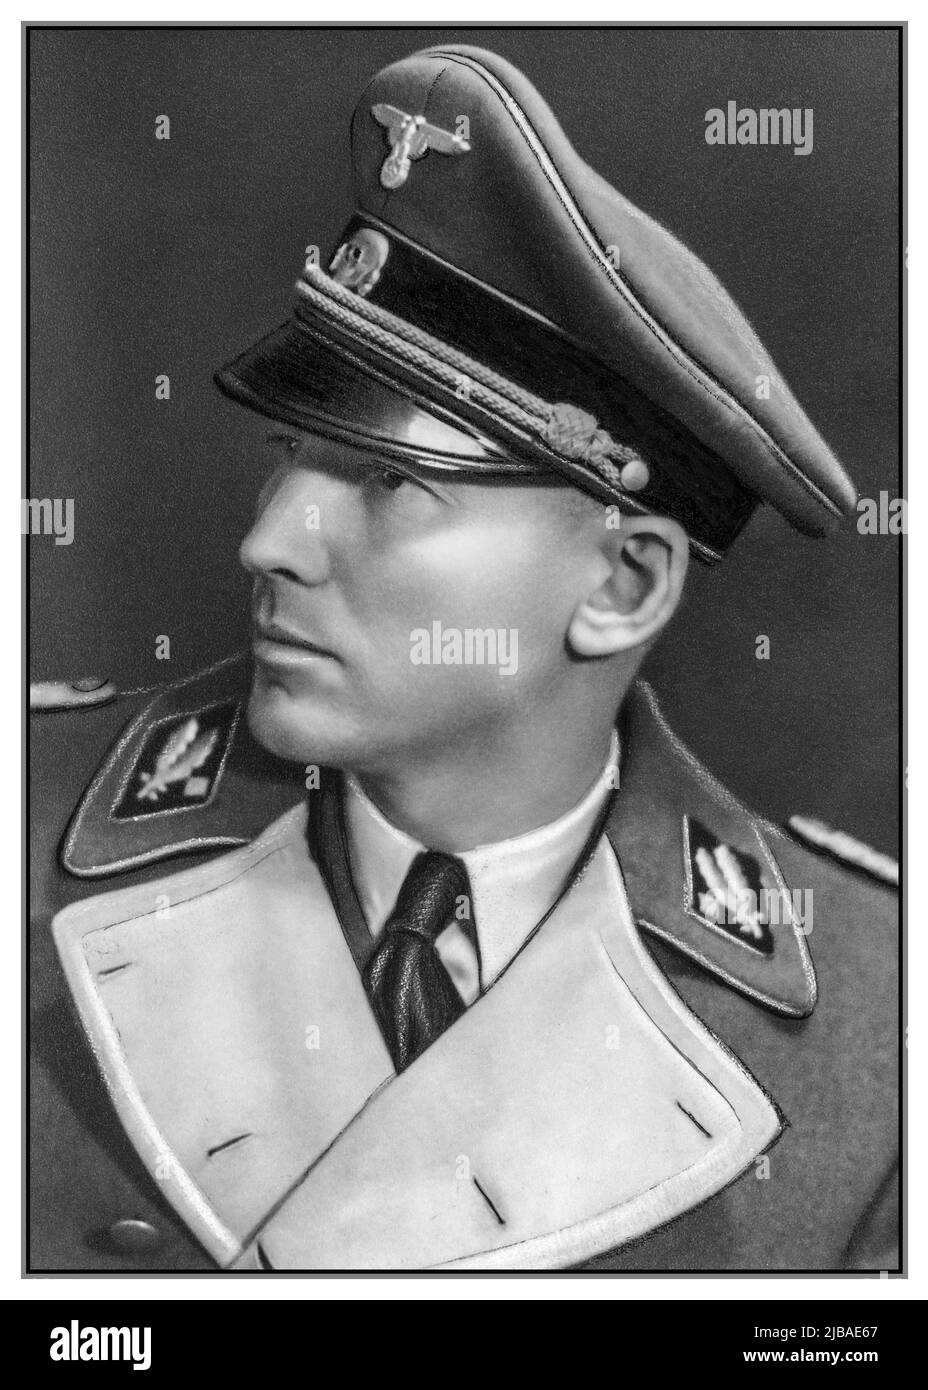 NAZI SS Baron Otto Gustav von Wächter (8 July 1901, Vienna, Austria-Hungary – 14 July 1949, Rome, Italy) was an Austrian lawyer, Nazi politician, a high-ranking SS-Gruppenführer of the SS, a paramilitary organisation of the Nazi Party. During the occupation of Poland in World War II, he was the Governor of the district of Kraków in the General Government and then of the District of Galicia (now mainly in Ukraine). Later, in 1944, he was appointed as head of the German Military Administration in the puppet state of the Republic of Salò in Italy. A war criminal who evaded justice. Stock Photo